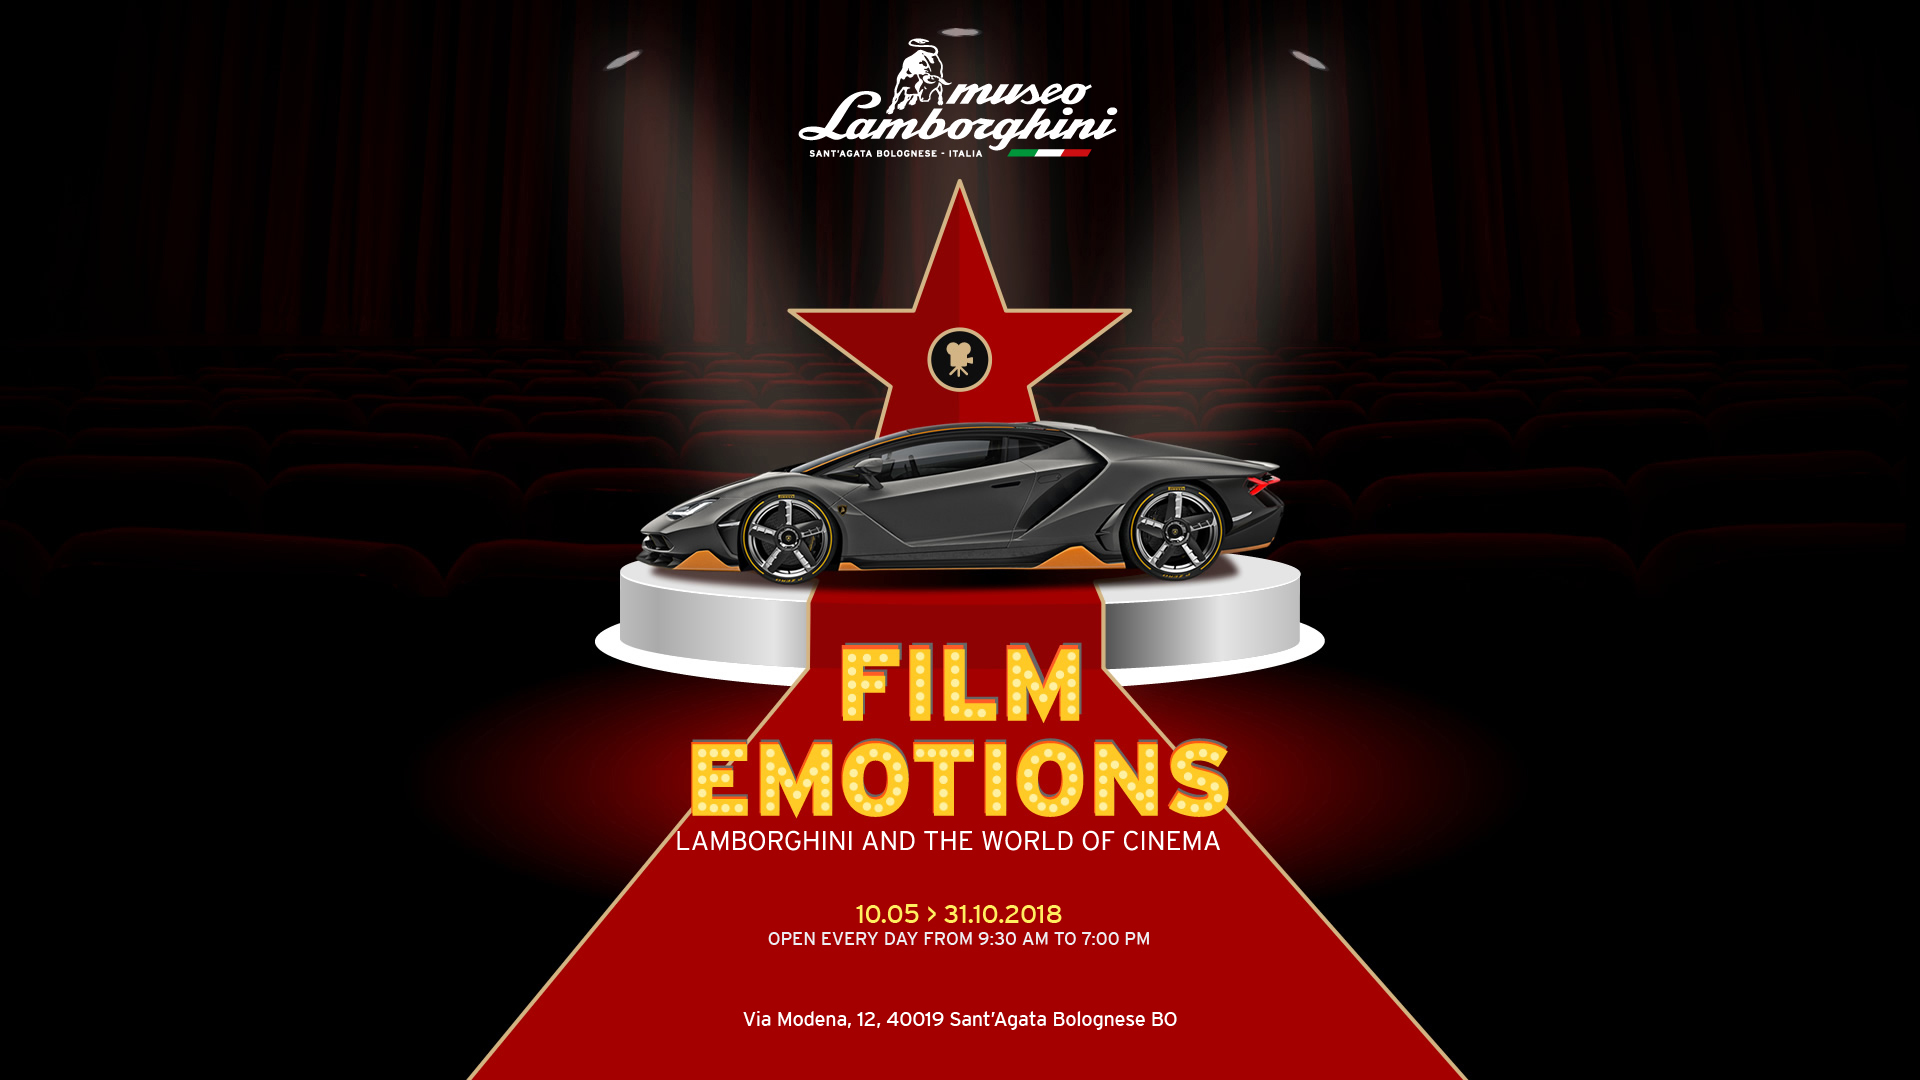 “Film emotions”: the most famous Lamborghini in the history of Cinema on display at the Lamborghini Museum